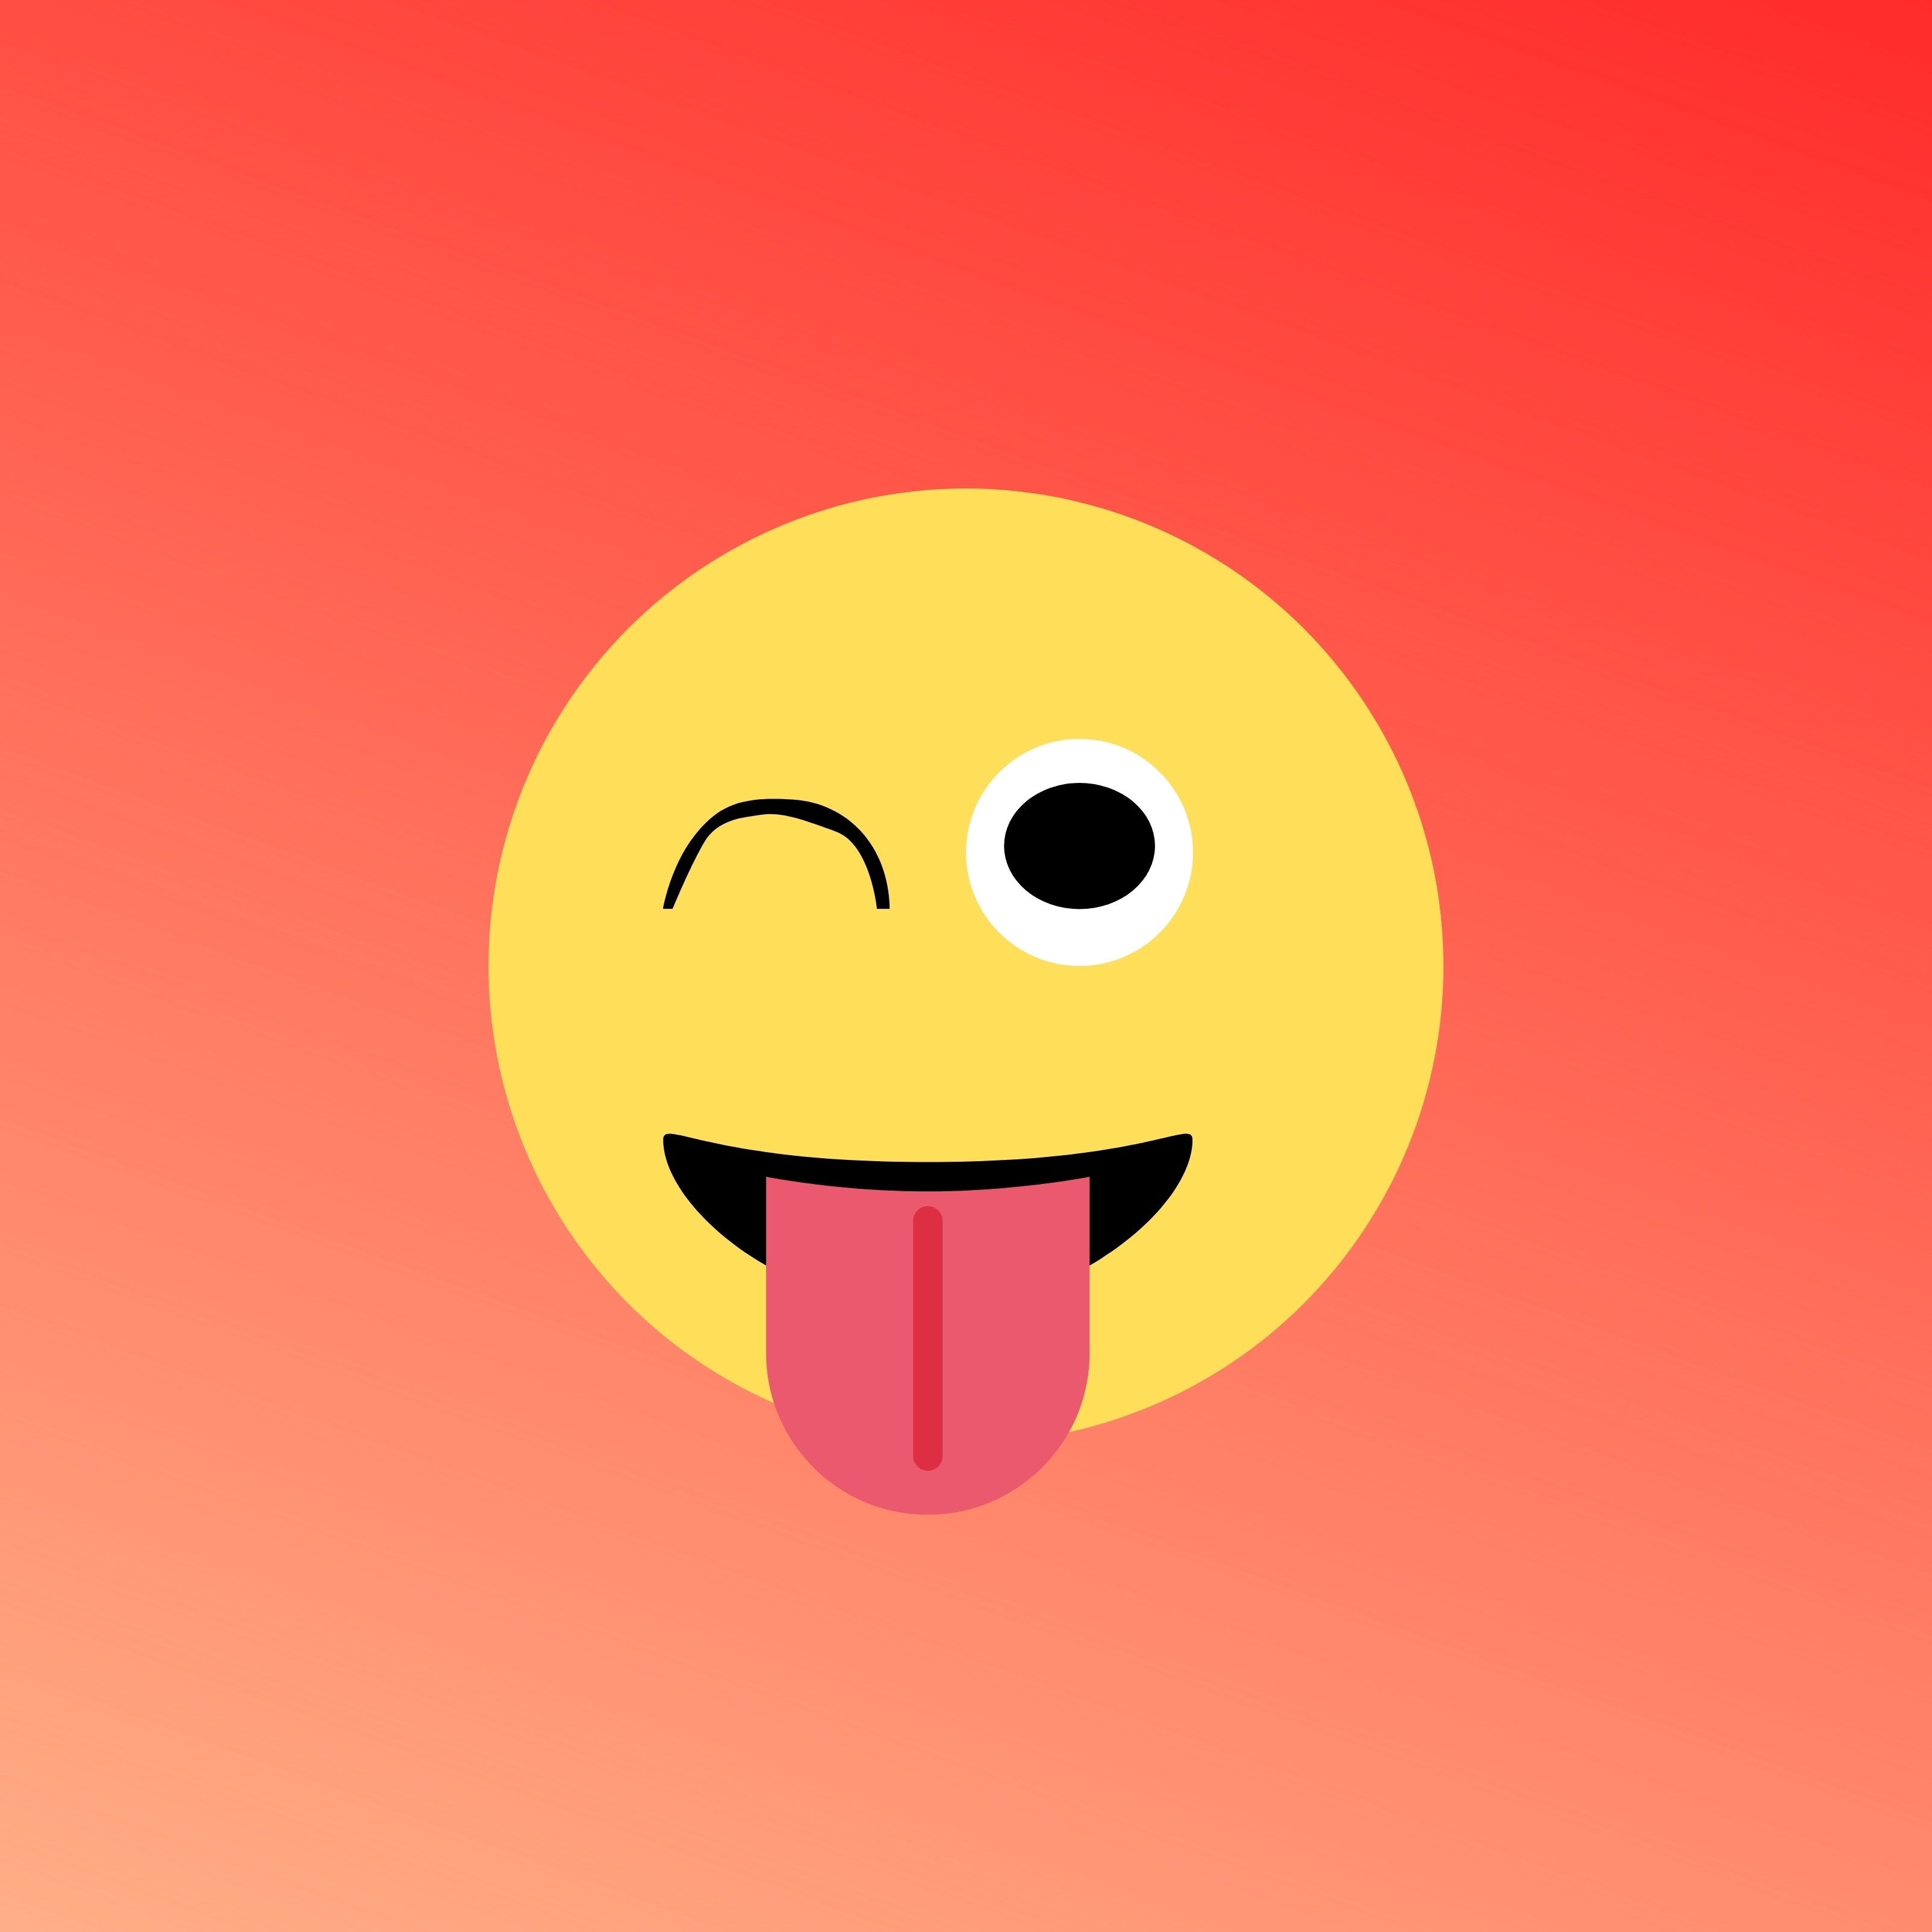 iPad Wallpapers Winking Face Tongue Red Background iPad Wallpaper 3208x3208 px